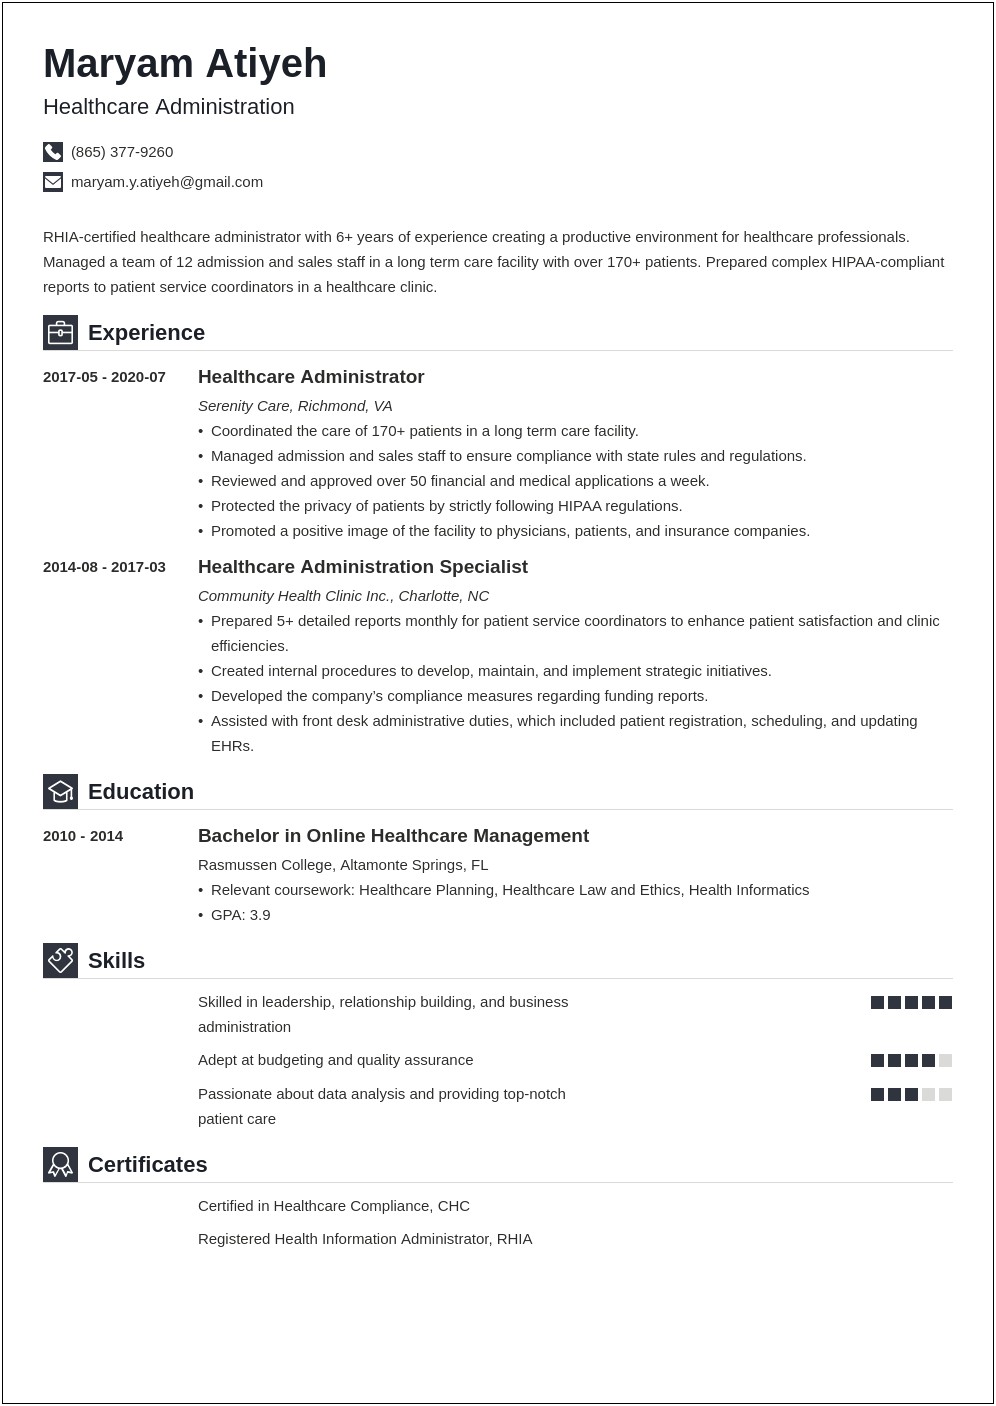 Administrative Experience Skills To List On Resume